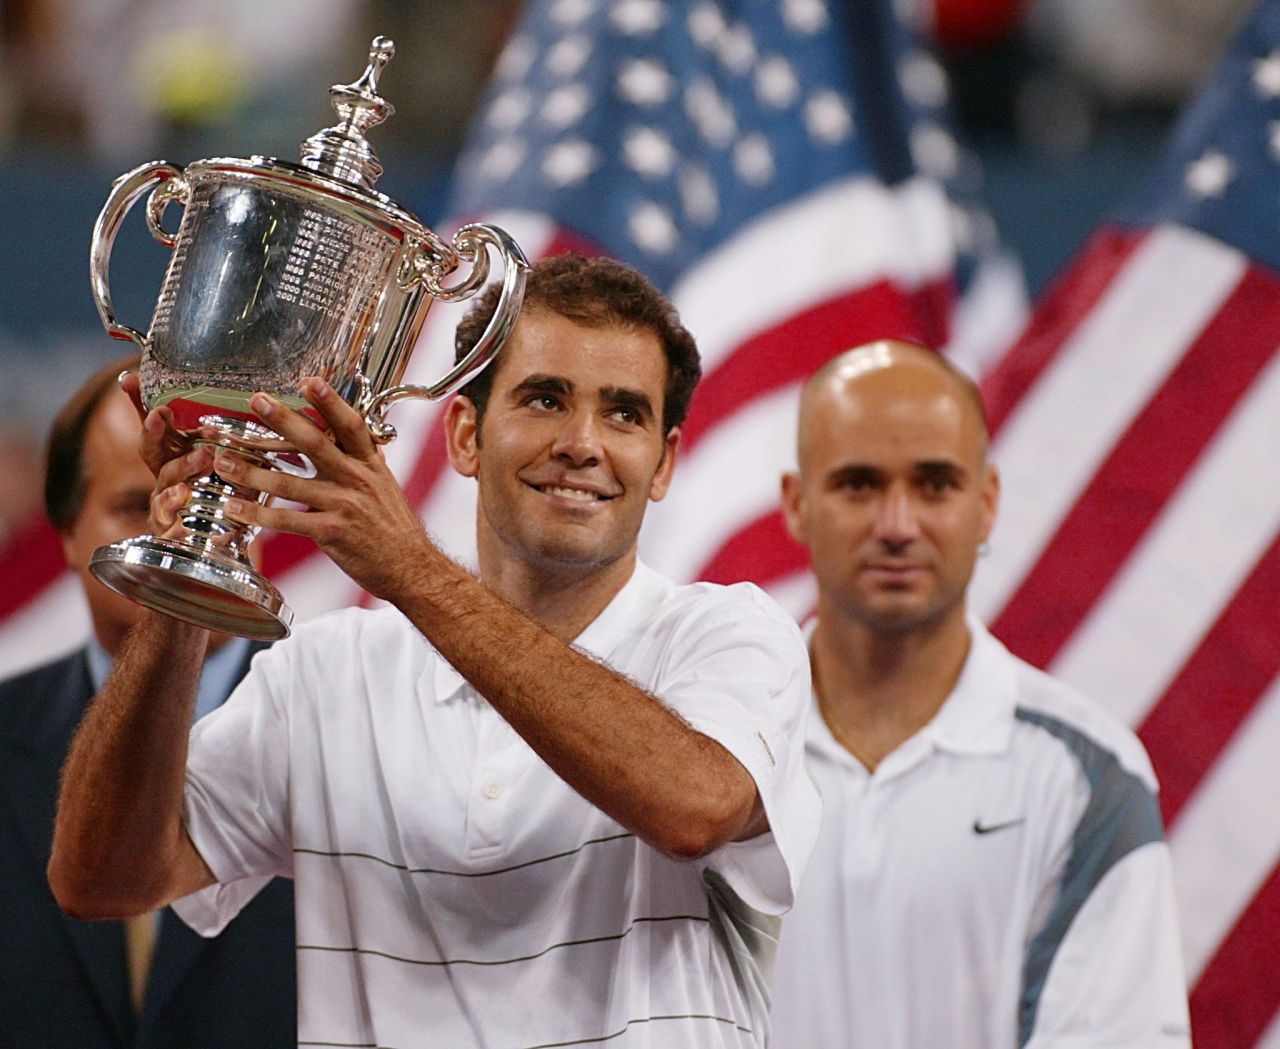 Sampras finished his career on a high, winning his 14th and final grand slam on home soil at the 2002 U.S. Open after beating Agassi in the final.